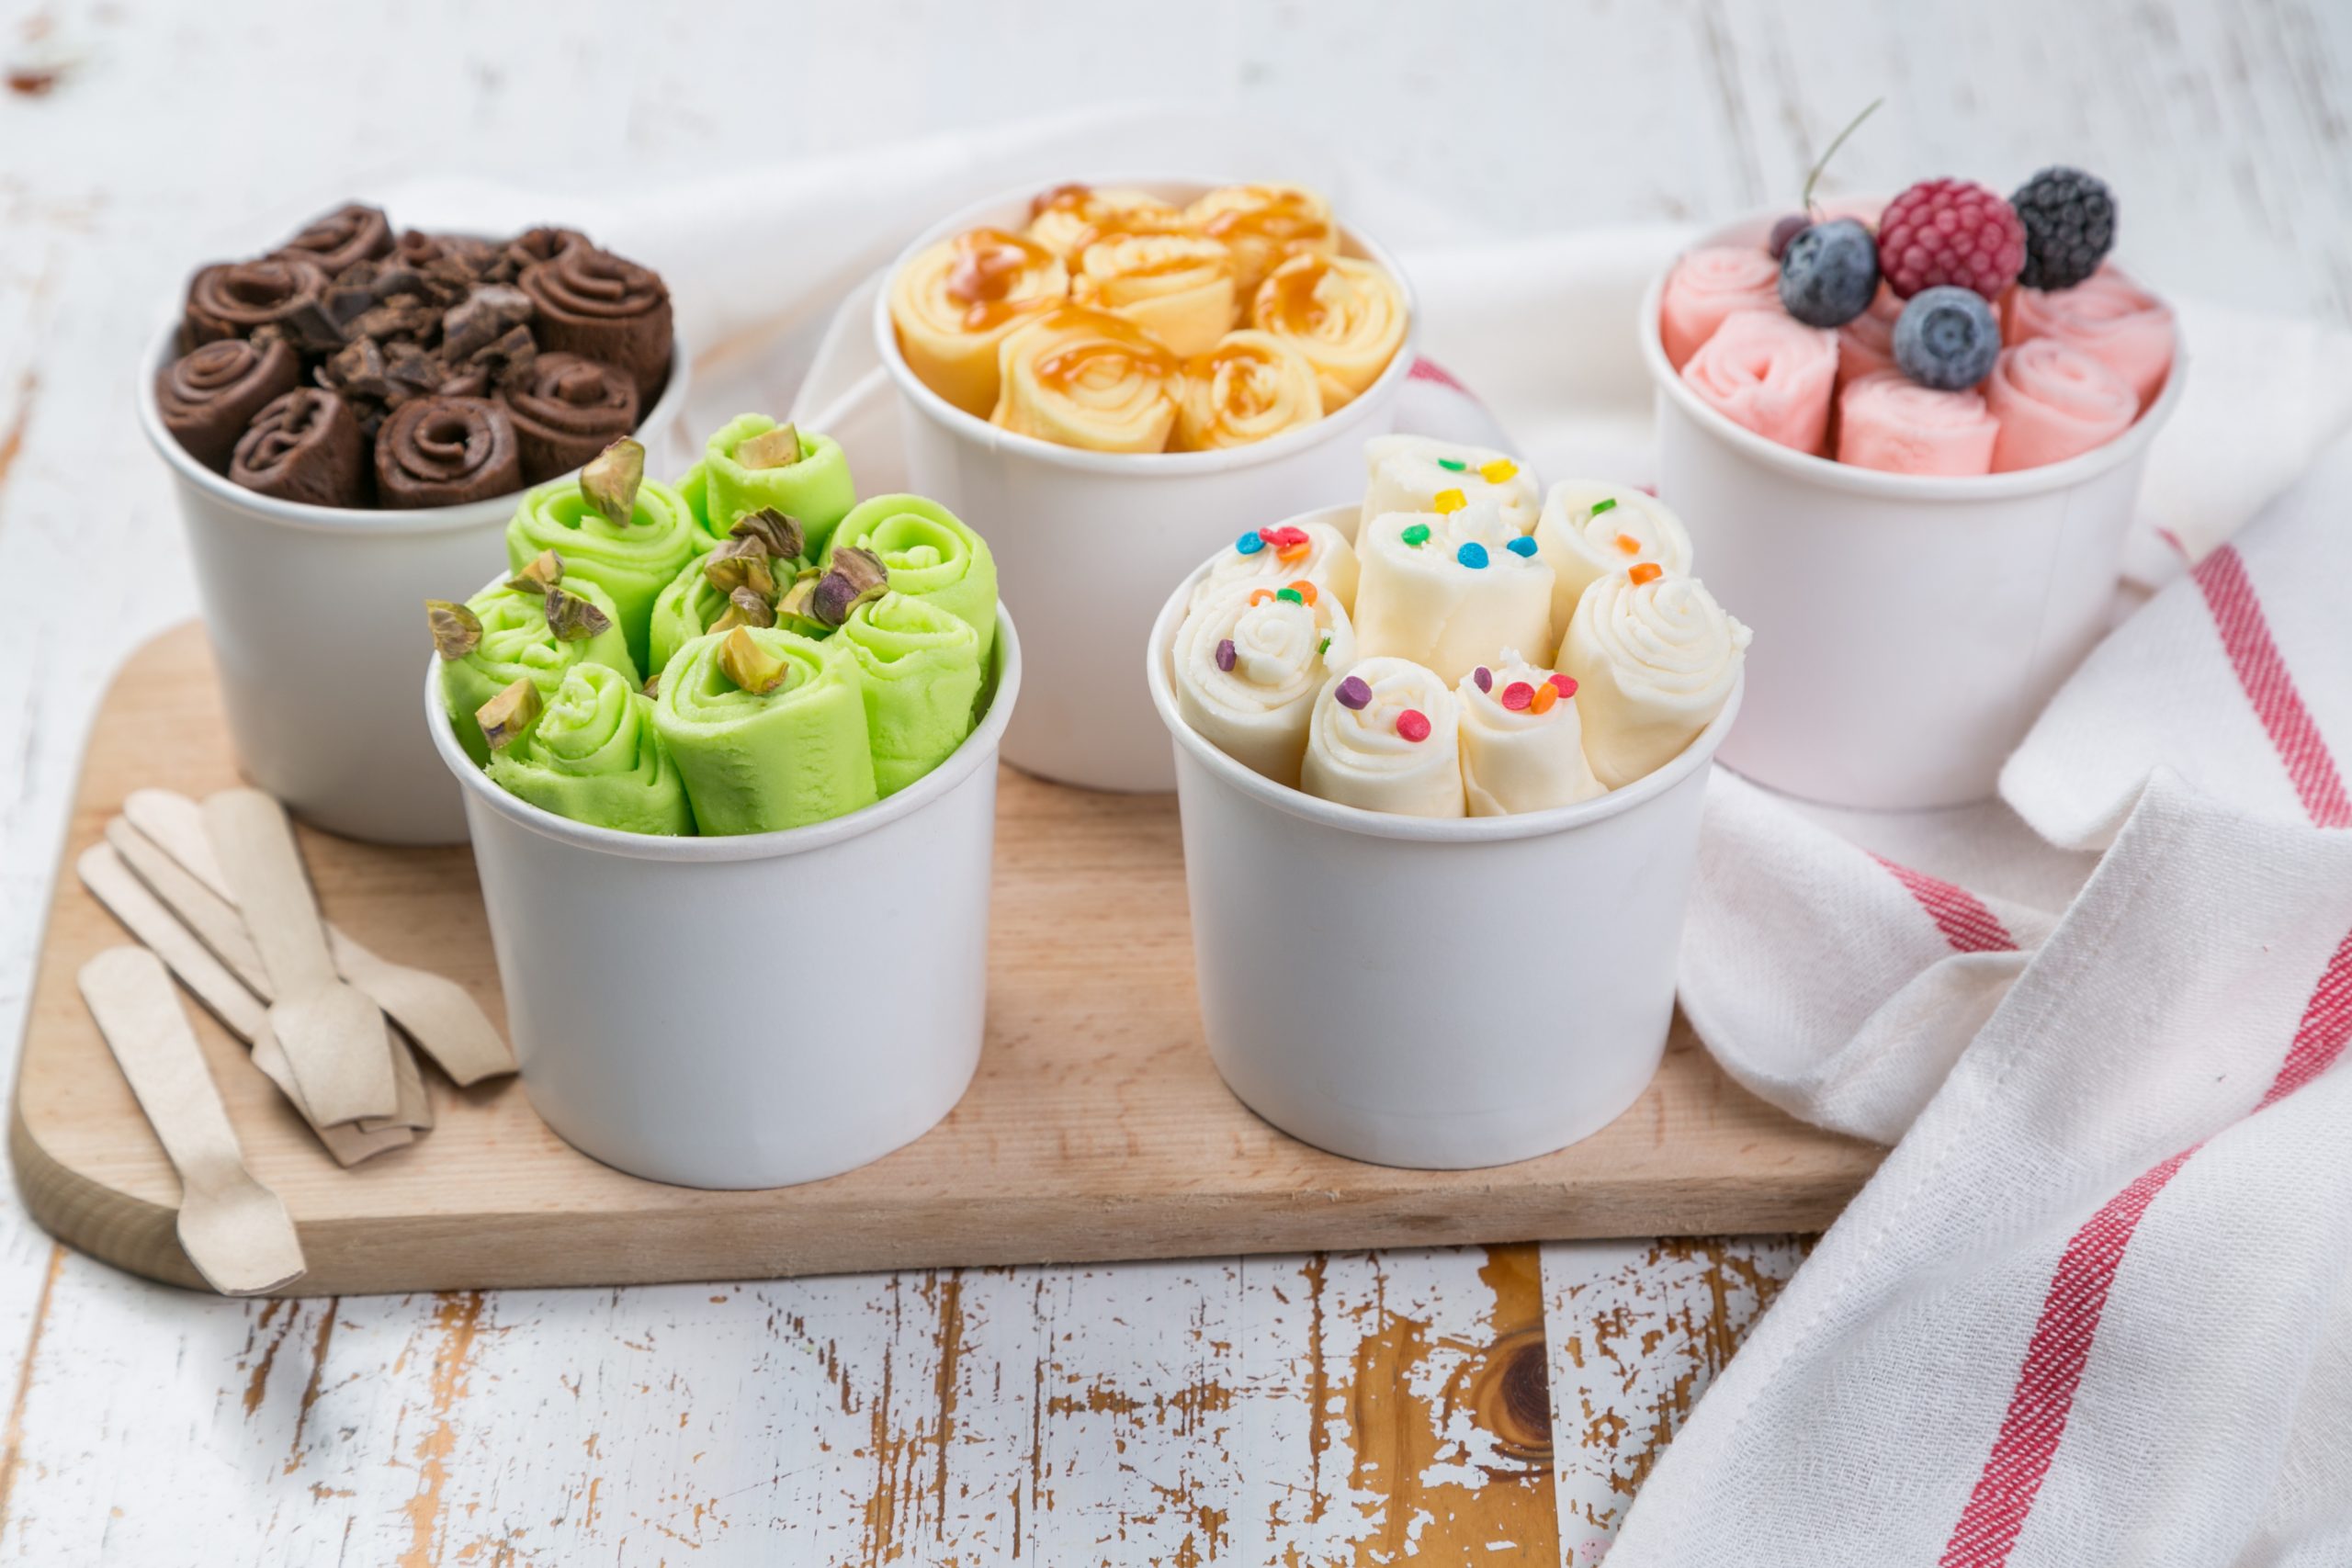 Selection of different rolled ice creams in cone cups, rustic wood background, copy space